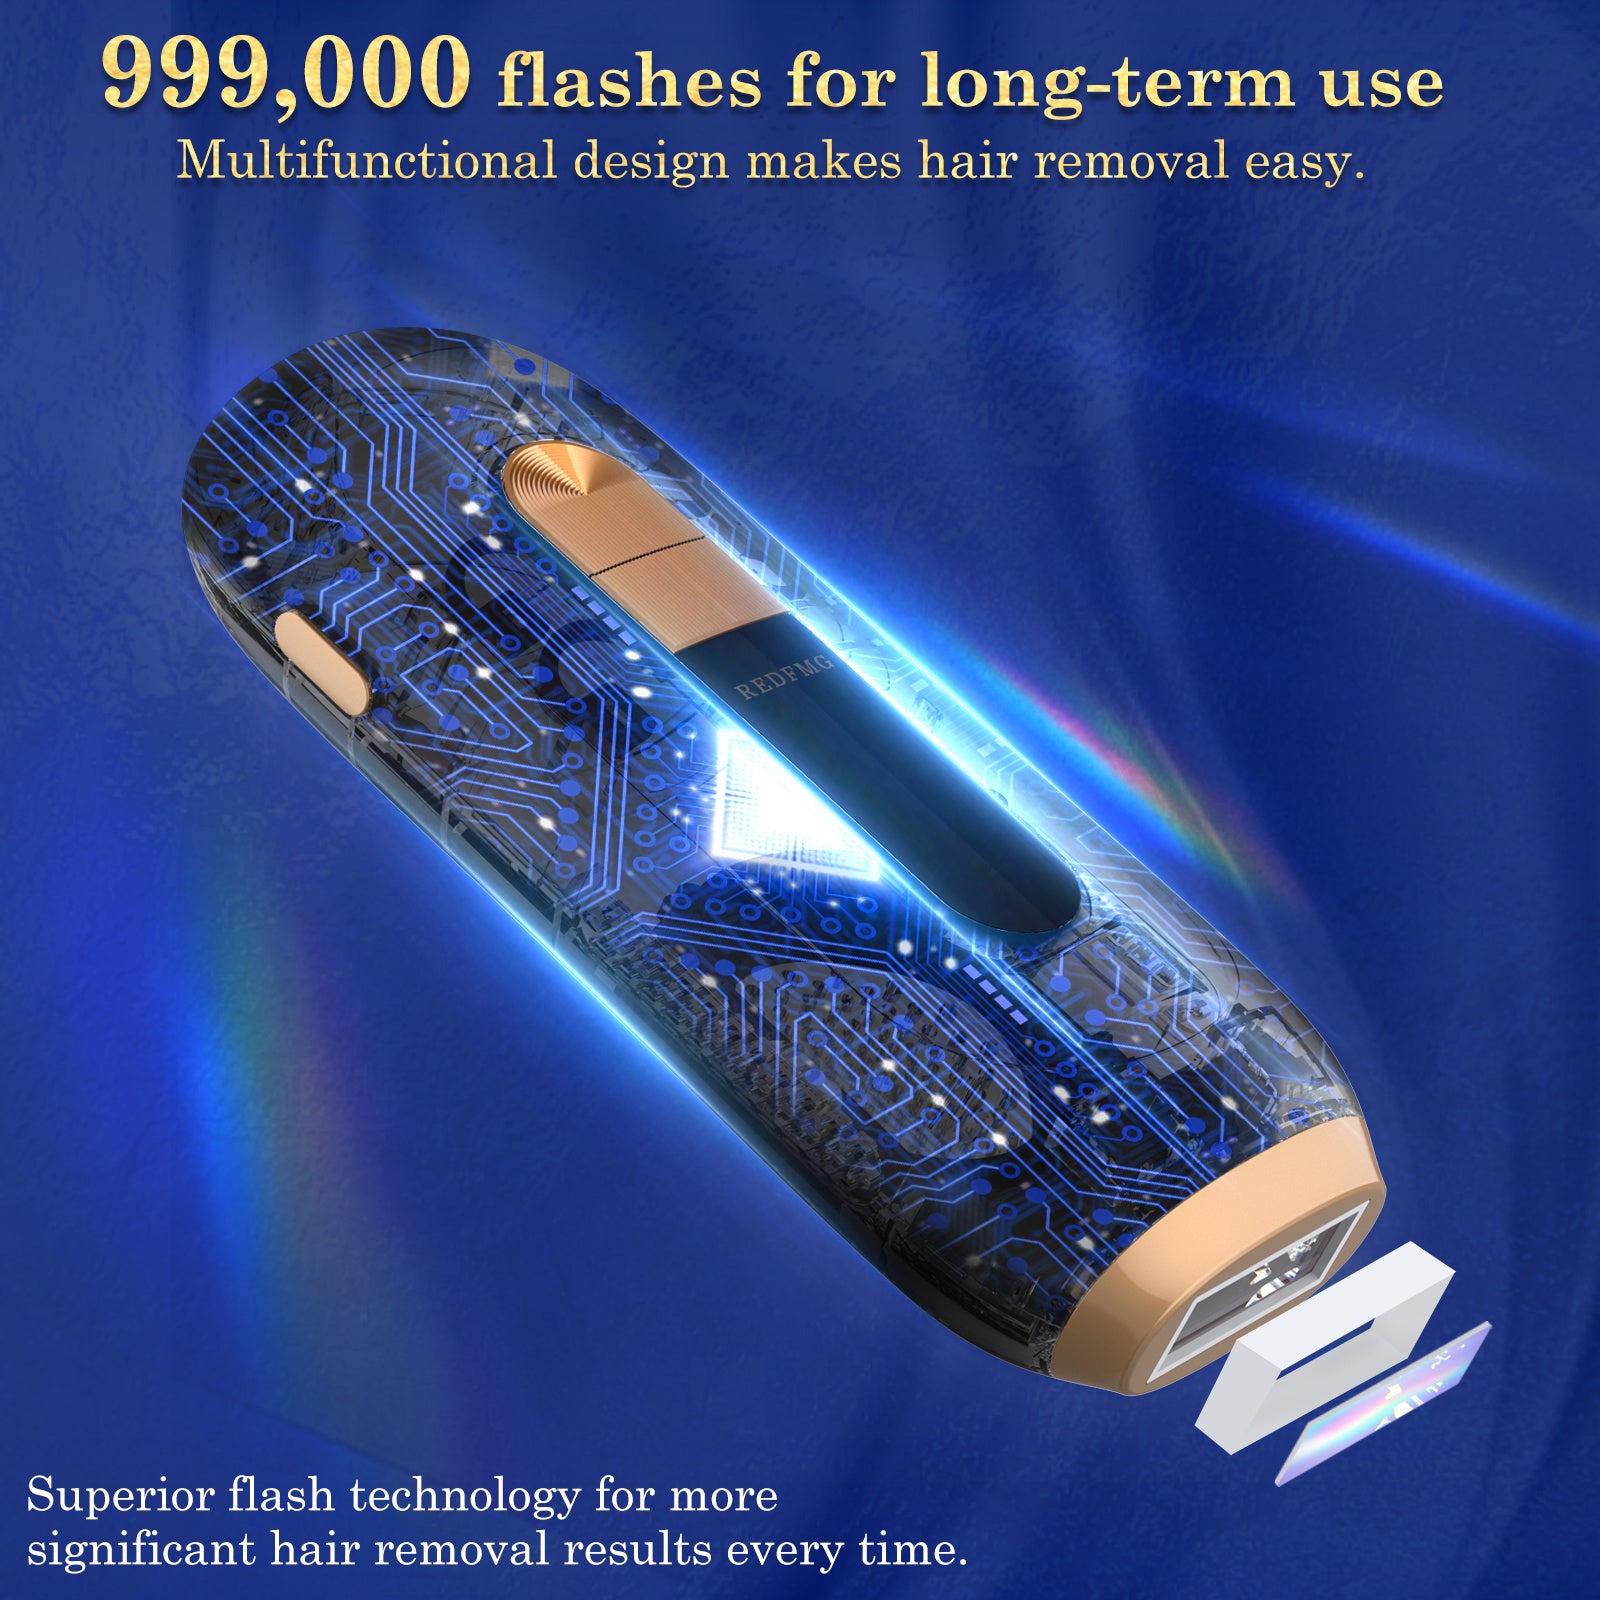 Gentle & Long-Lasting Laser Hair Remover - 999,000 Flashes for Body & Face